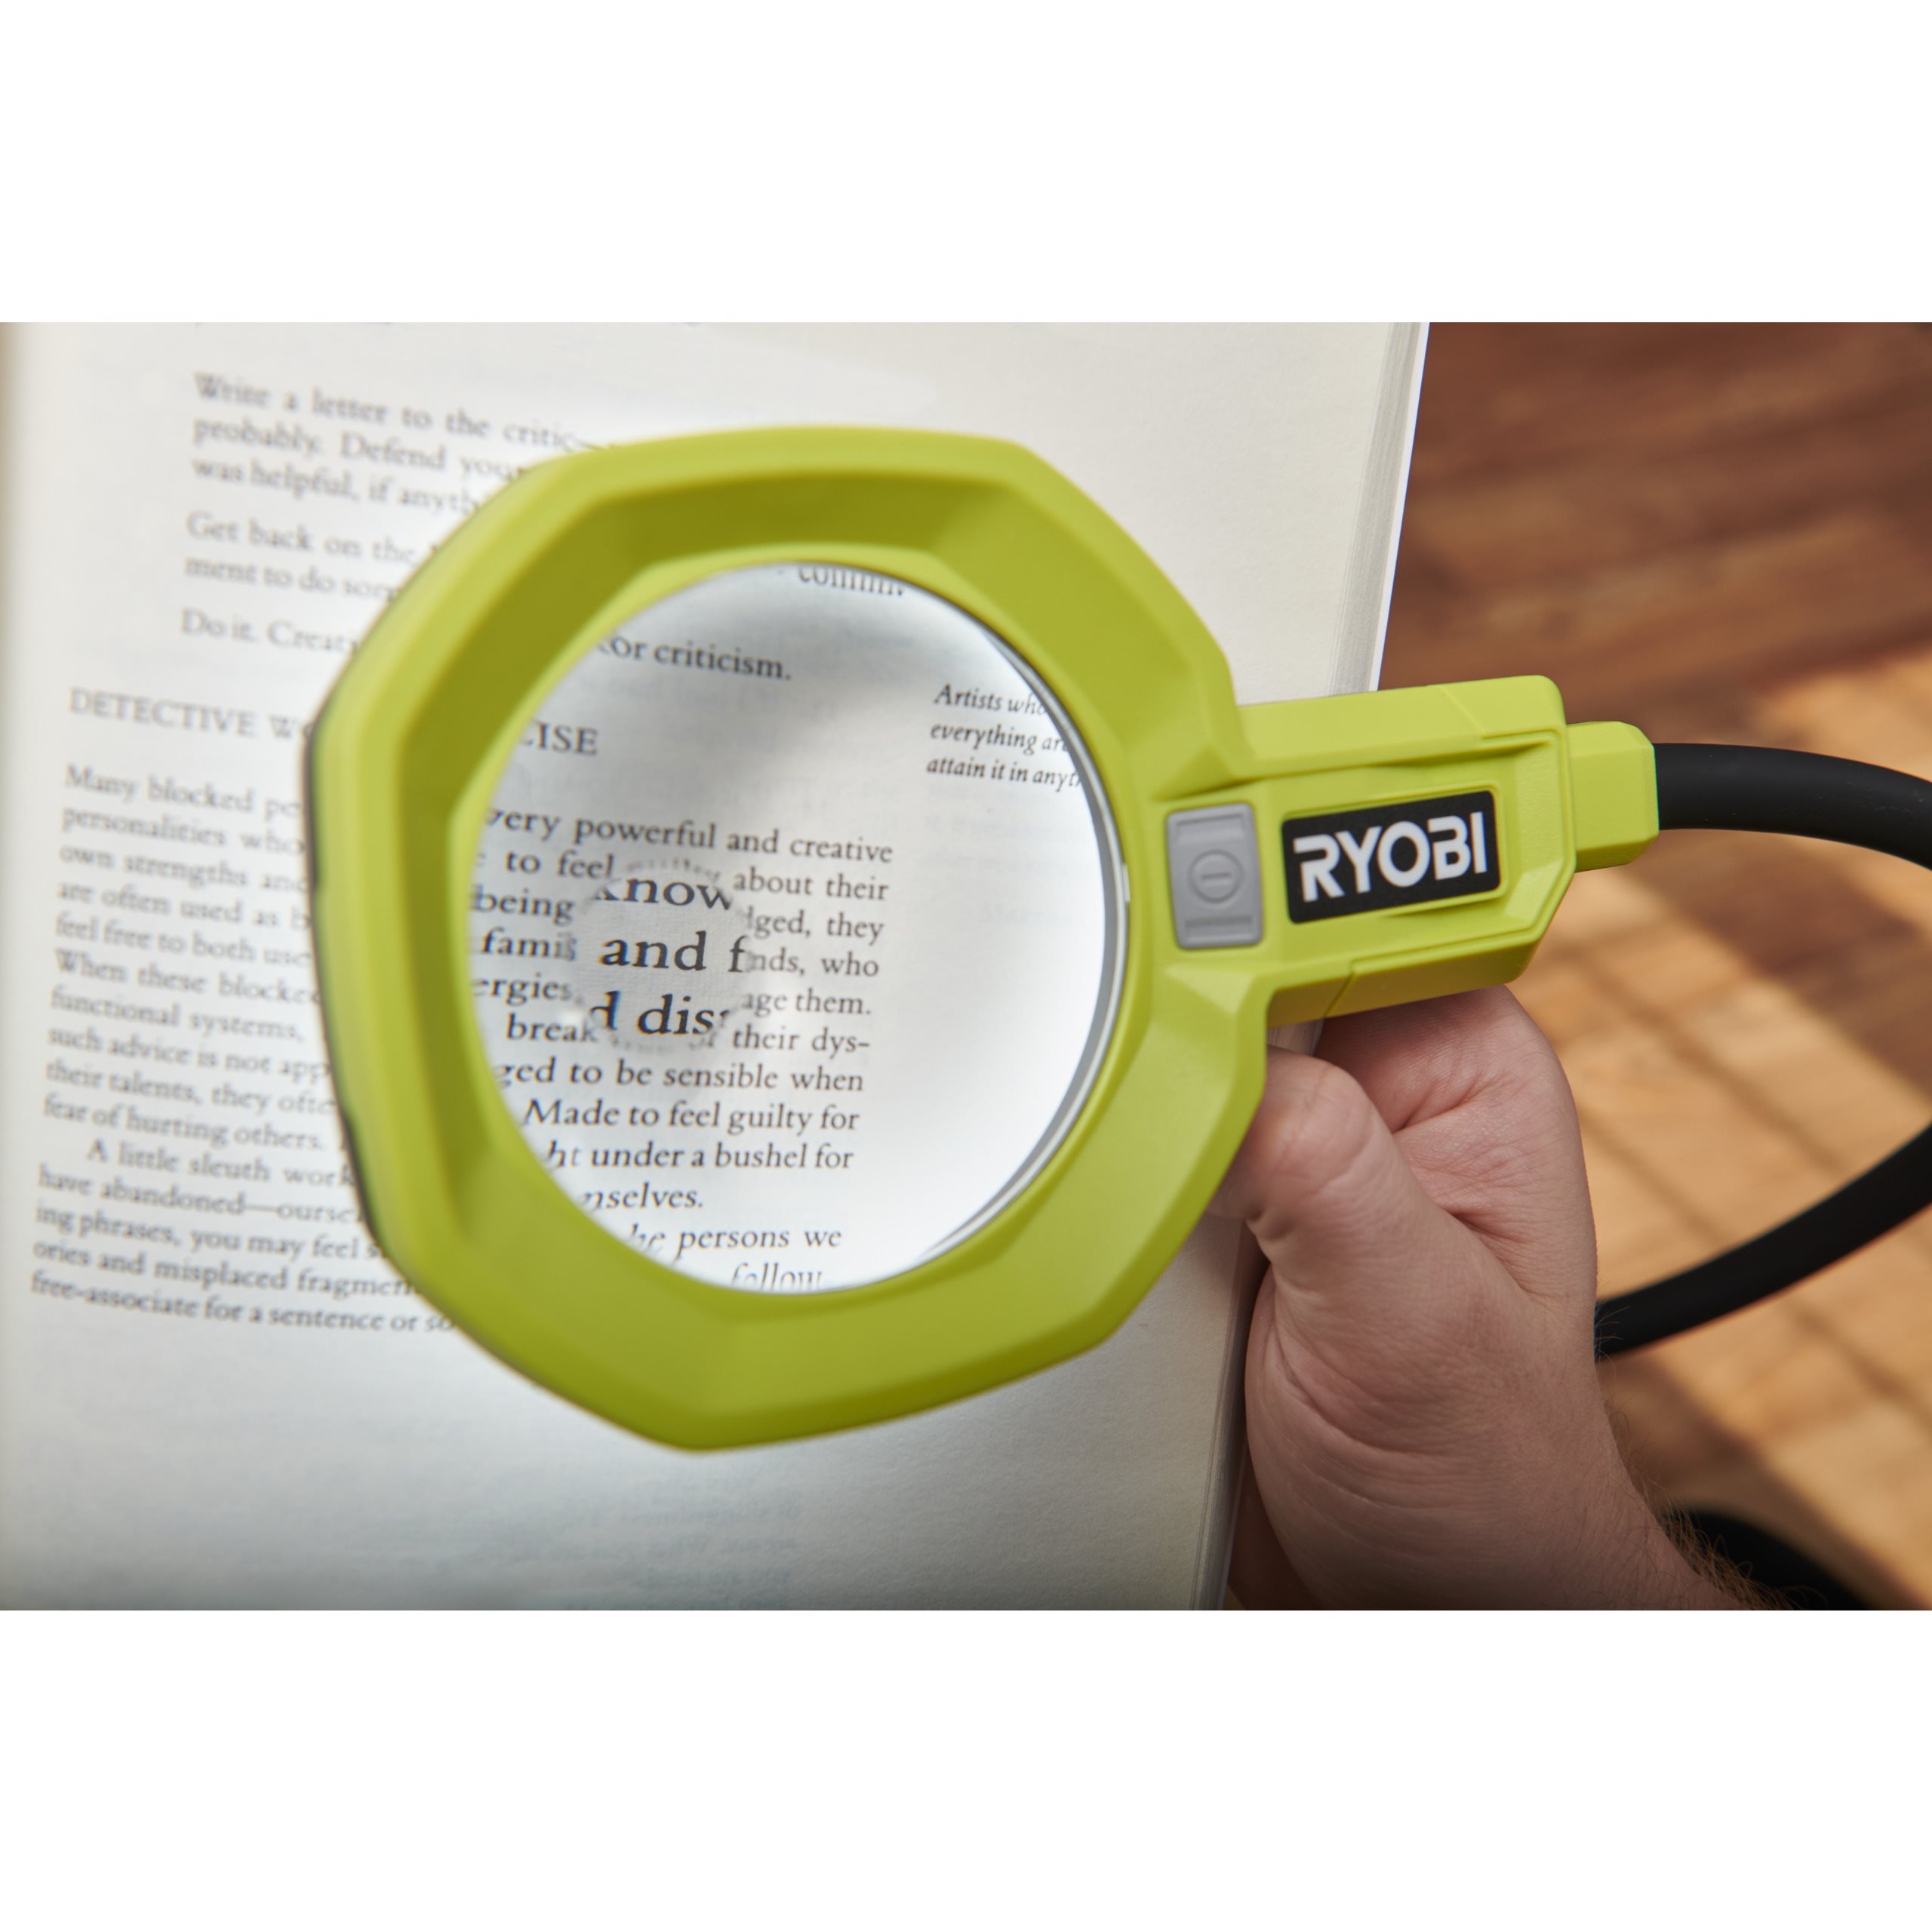  ASHLGQB Magnifying Glasses with Light, Rechargeable